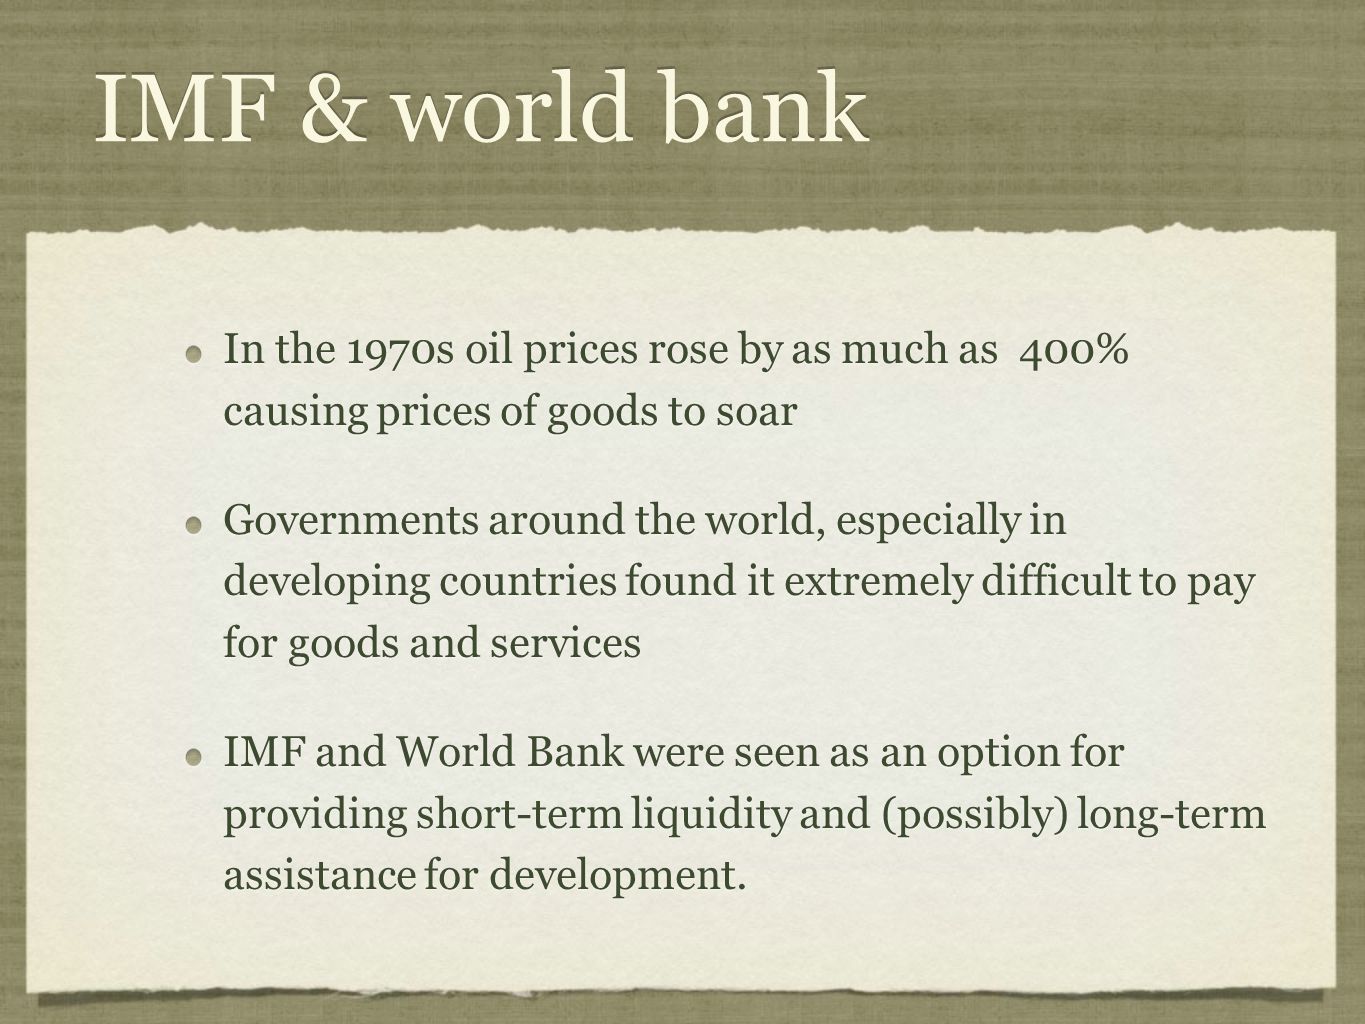 IMF & world bank In the 1970s oil prices rose by as much as 400% causing prices of goods to soar.